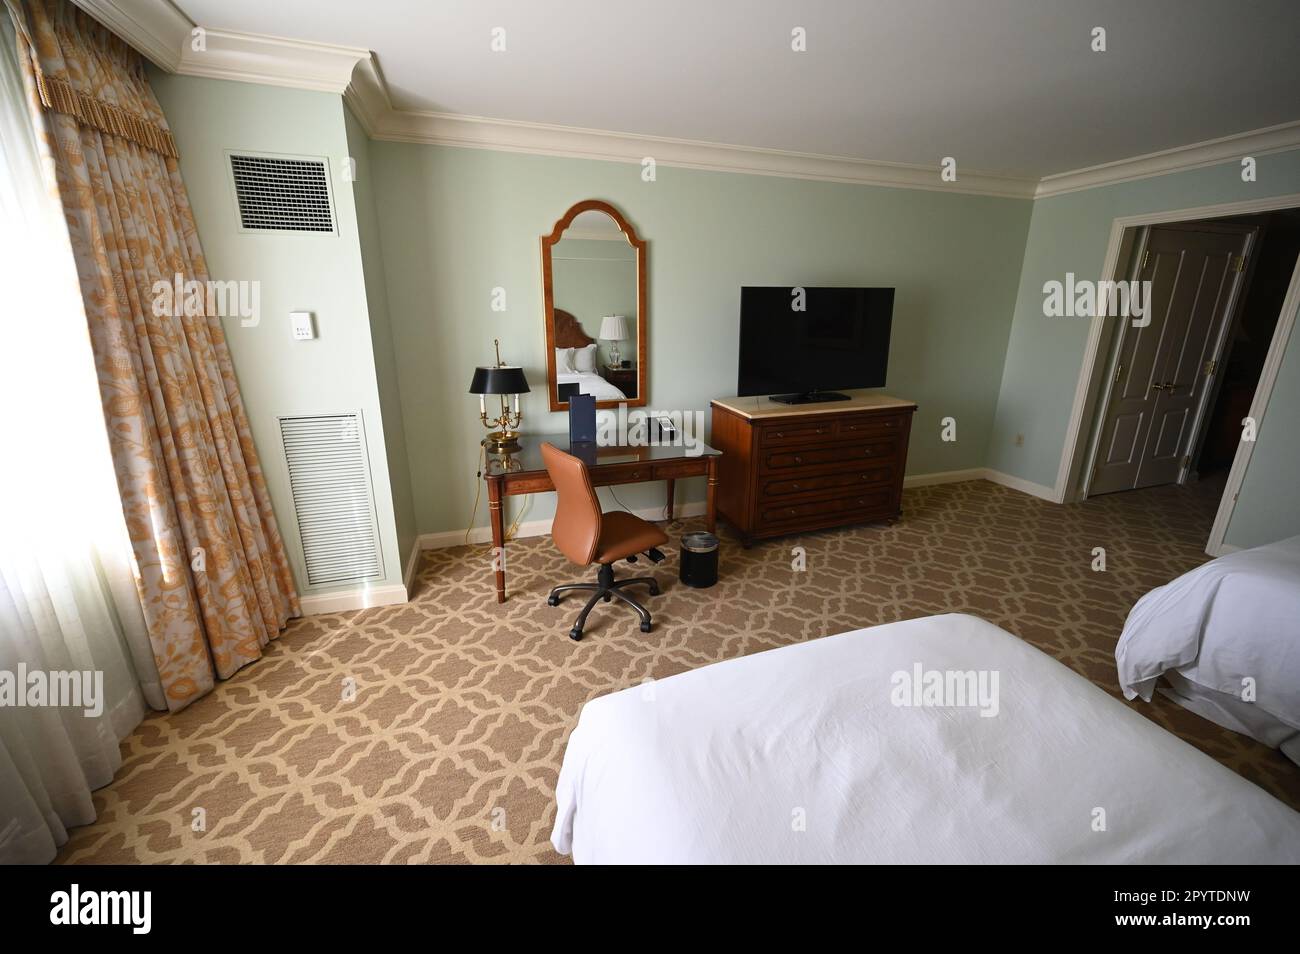 Room 2829 at the Paris Hotel on the 28th floor with a Paris theme picture;  in Las Vegas, Nevada USA Stock Photo - Alamy